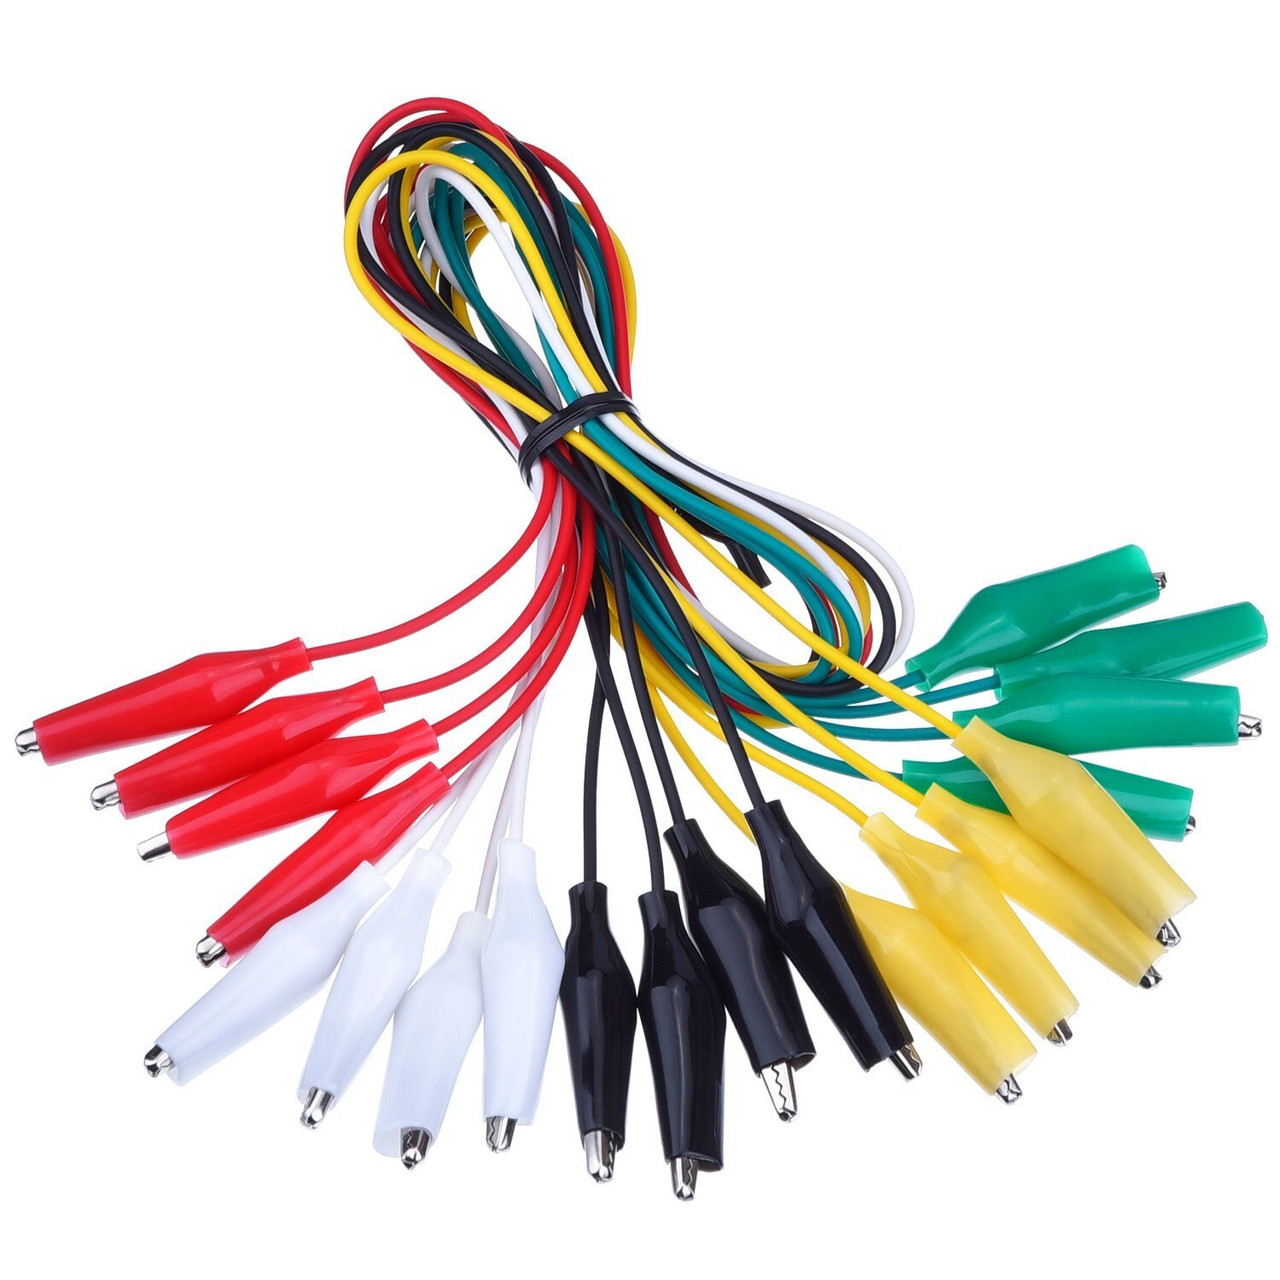 10 Wire Alligator Test Lead Set 5 Pairs of Colors 